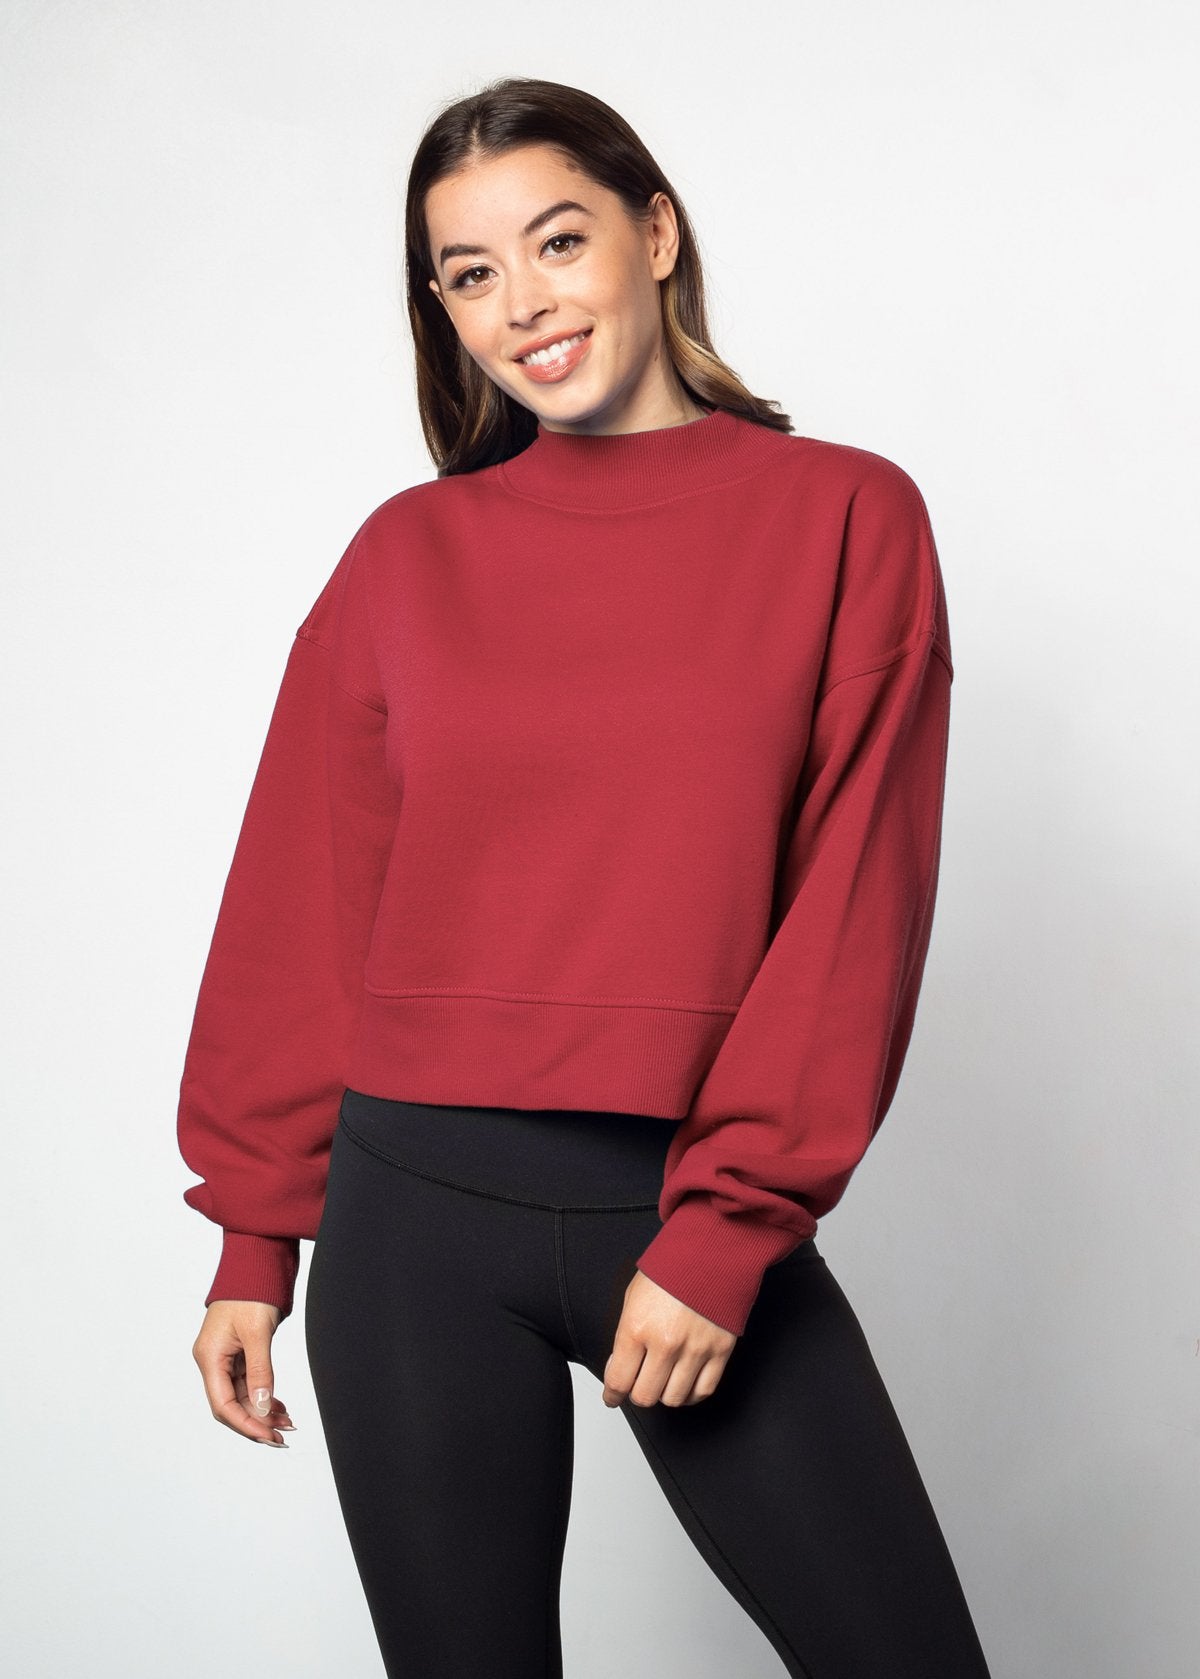 Crimson mockneck sweatshirt with dropped shoulders, balloon sleeves, ribbed neck, sleeves and hem. Cropped relaxed silhouette